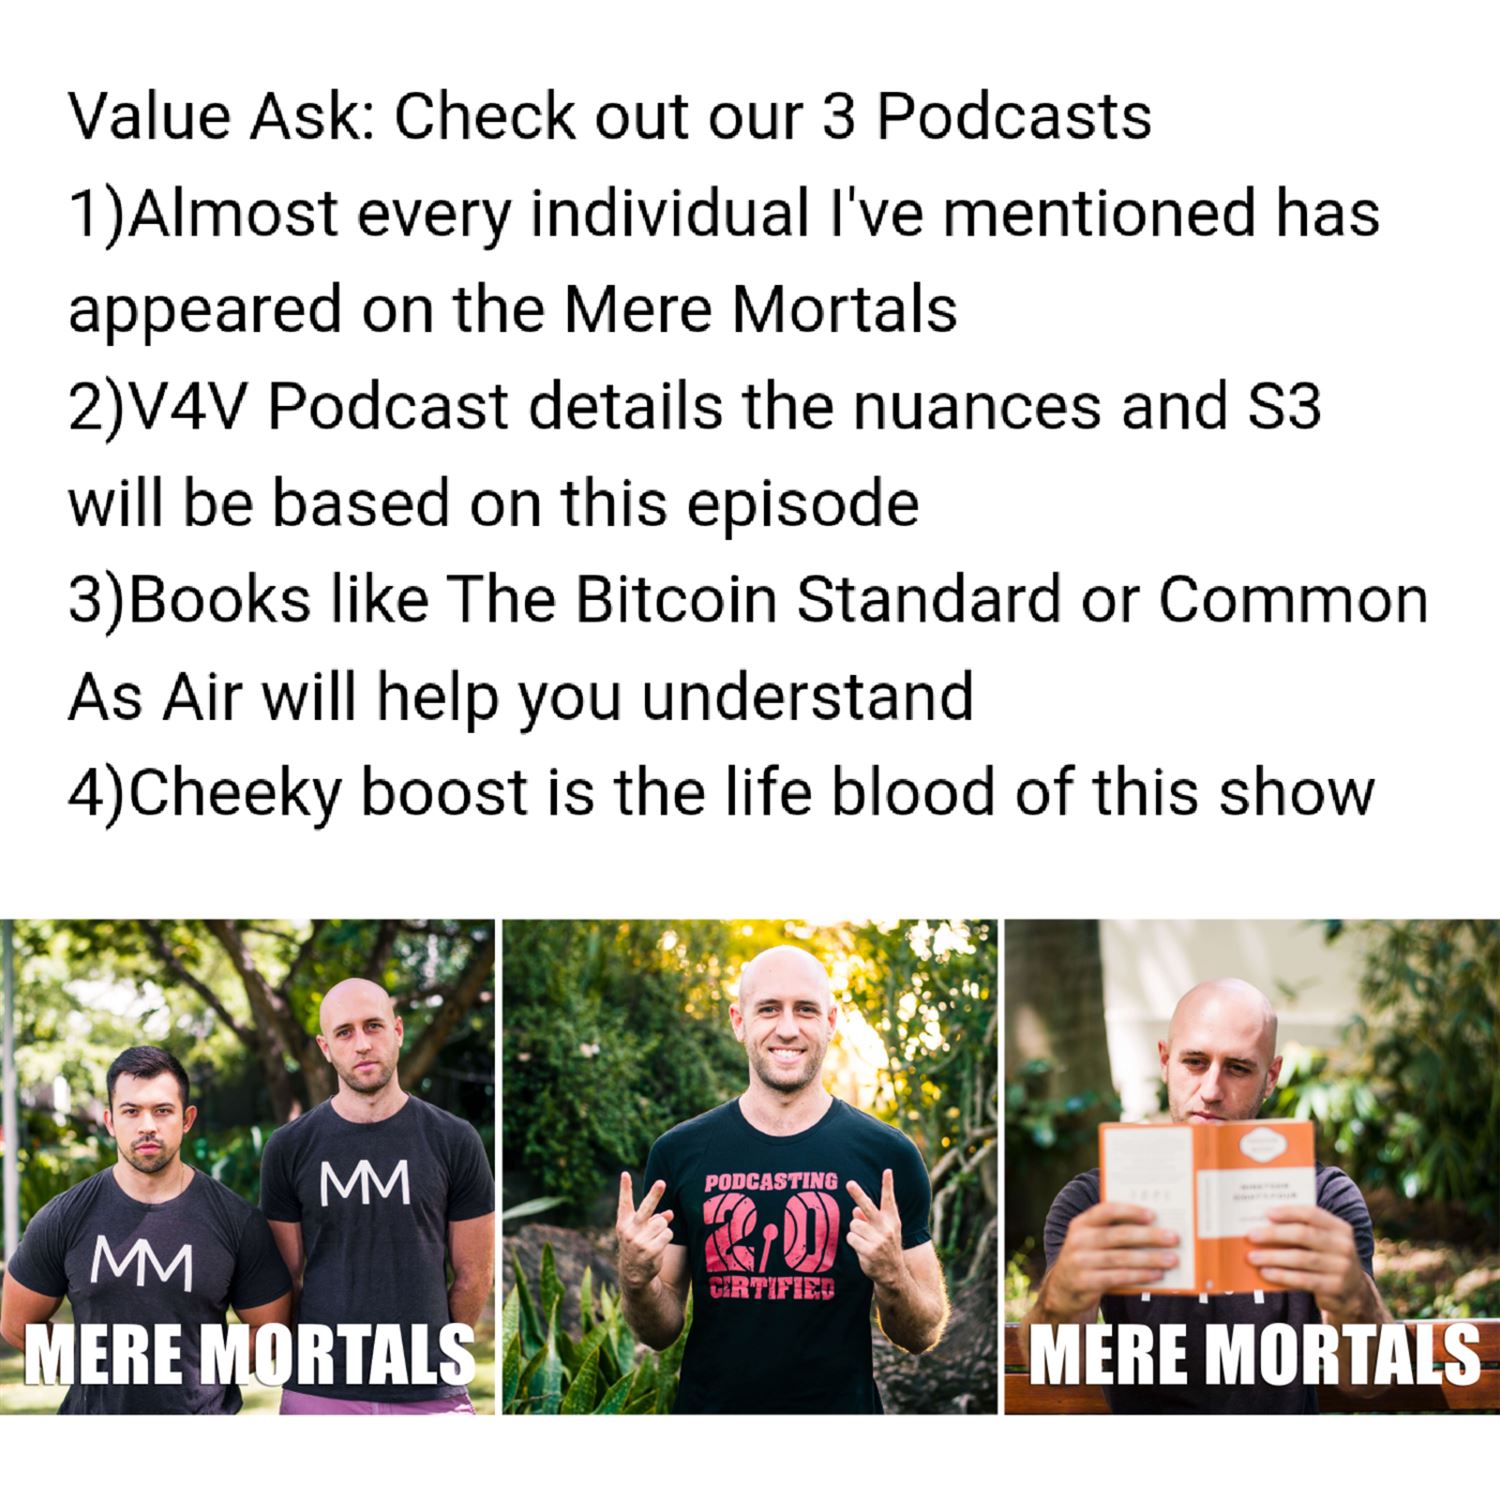 Value Ask: Check out the 3 podcasts